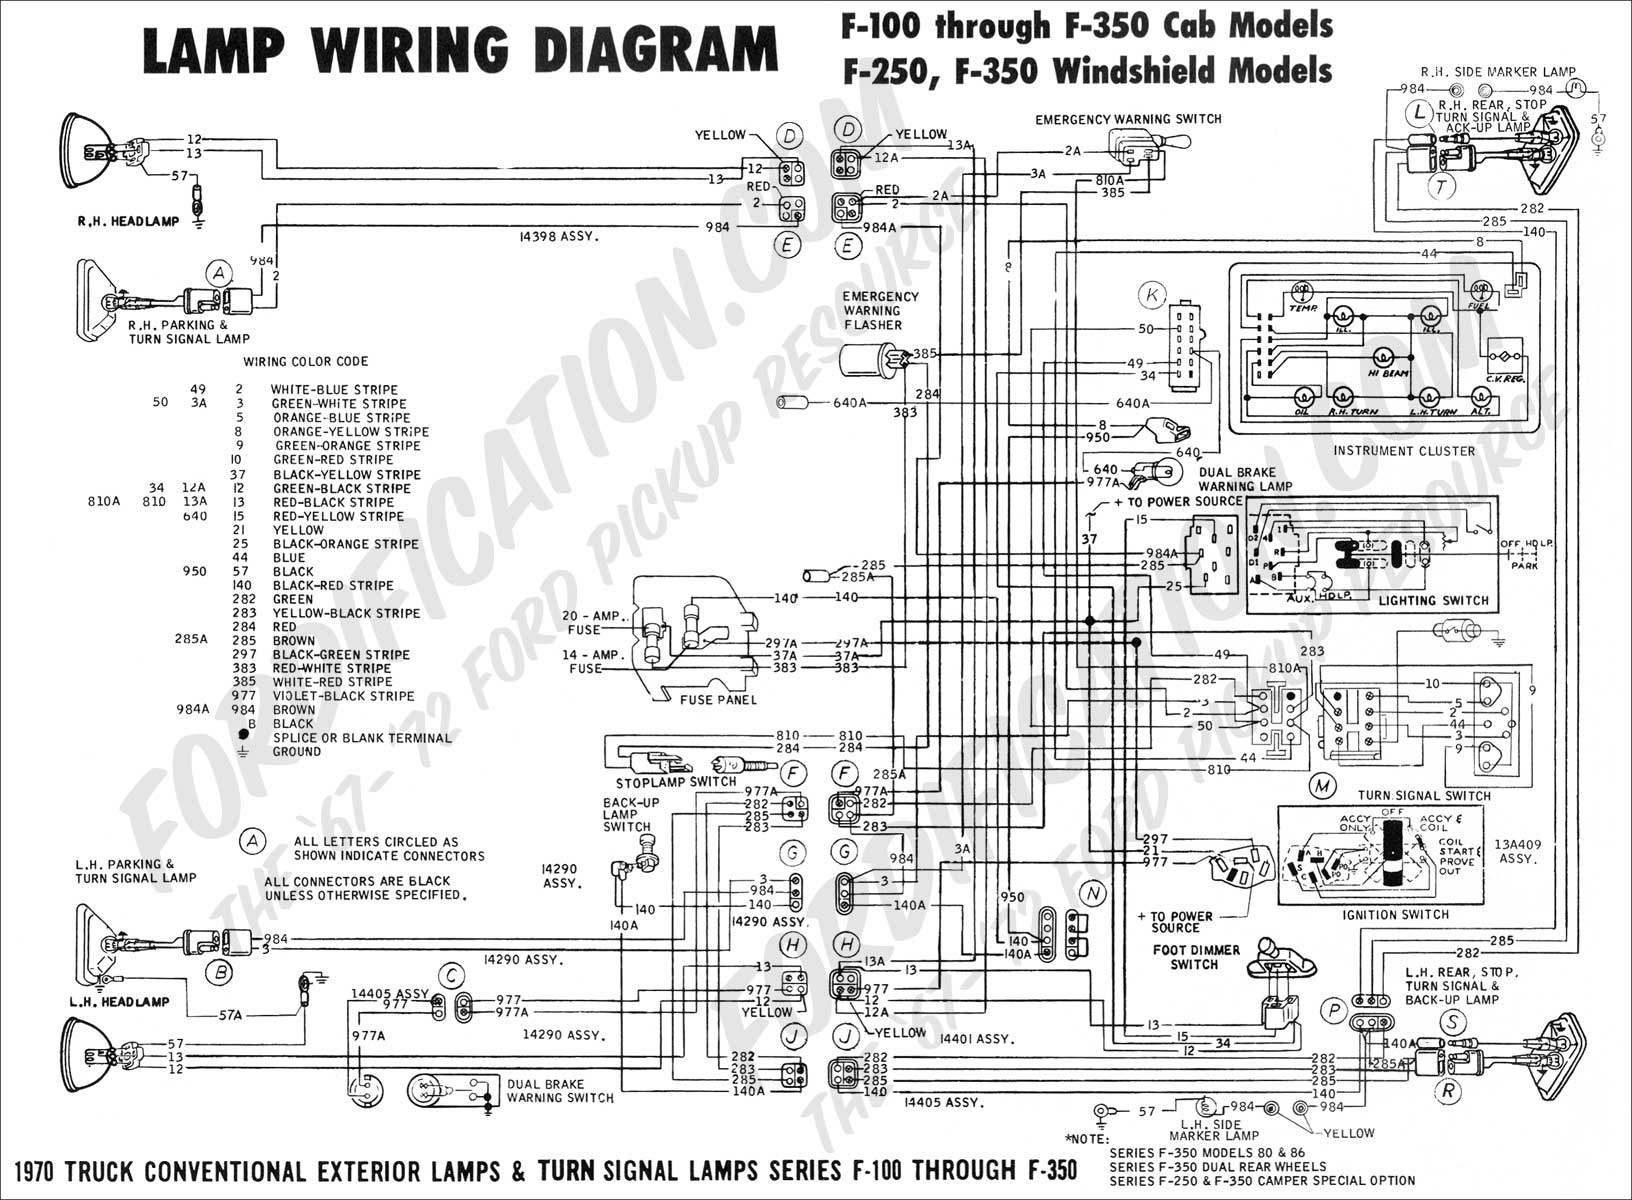 Ford Wiring Harness Diagrams - Wiring Diagrams Hubs - Ford Wiring Harness Diagram